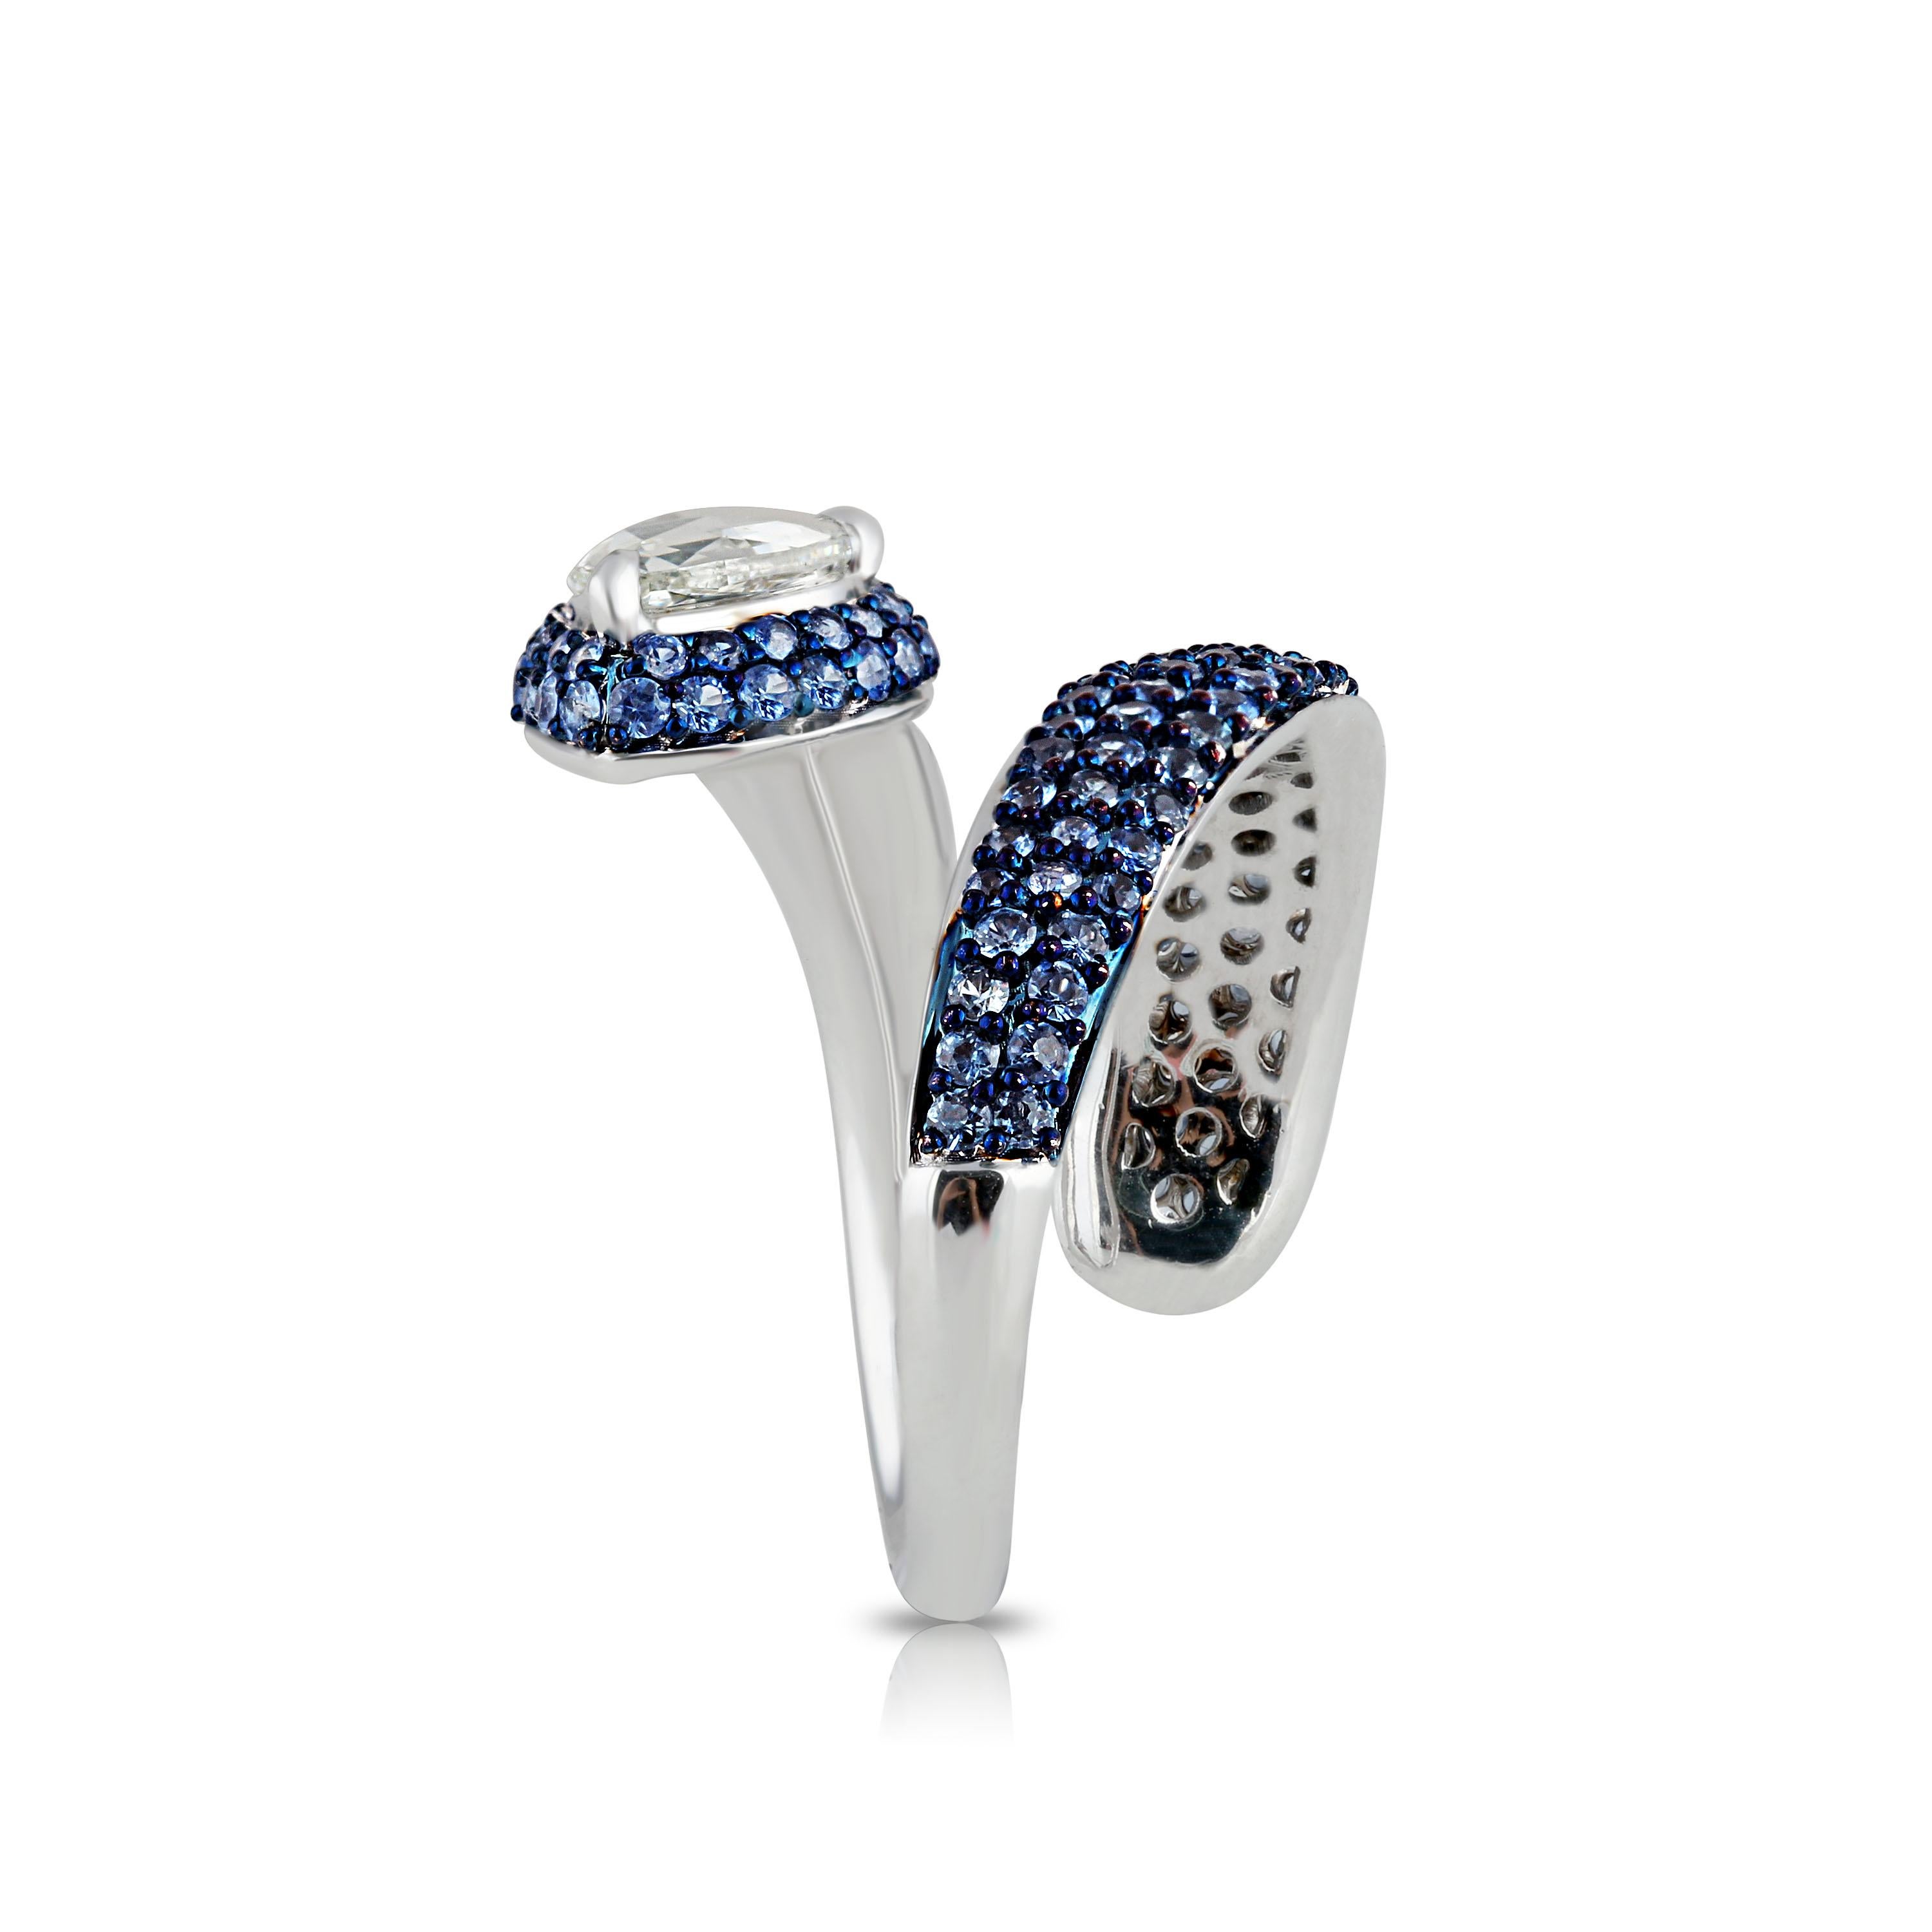 Drawing inspiration from the serpent is this modern-day 18K white gold ring studded with a pear rose cut diamond and blue sapphires in prong and pavé settings. Its elegant design symbolizes the continuity of life with its intricately placed 152